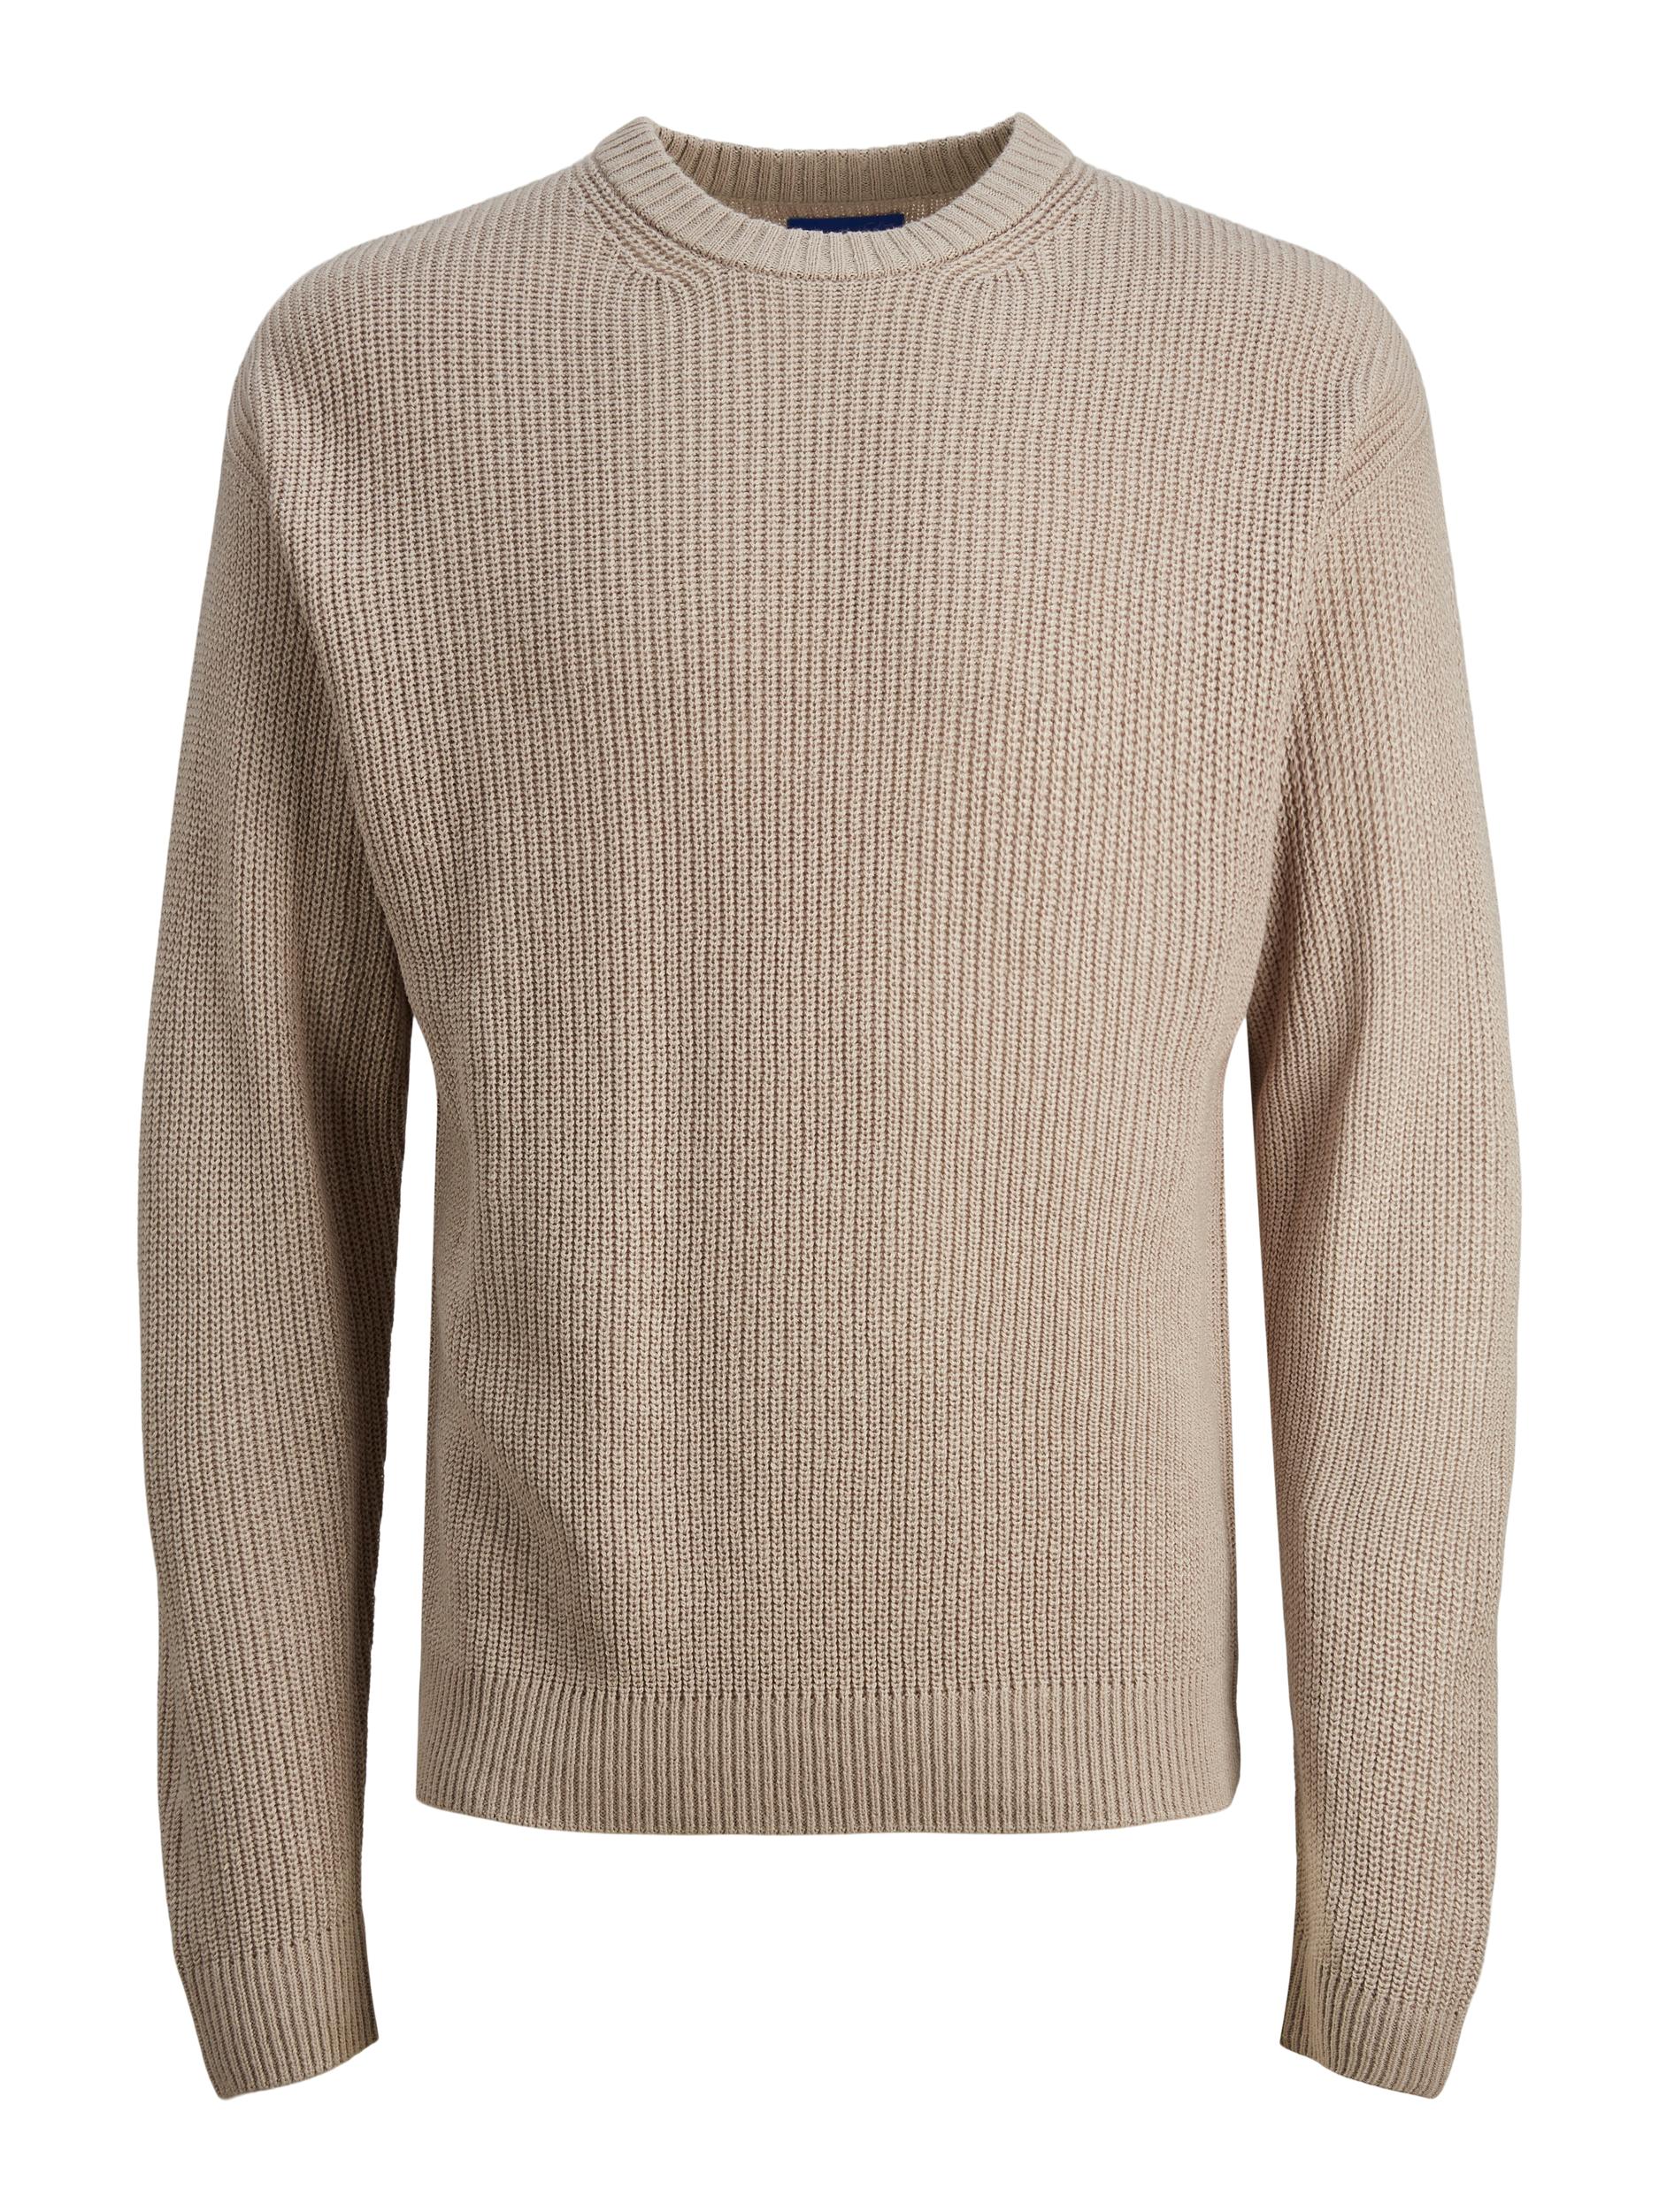 Men's Rib Knit Crew Neck-Atmosphere-Front View